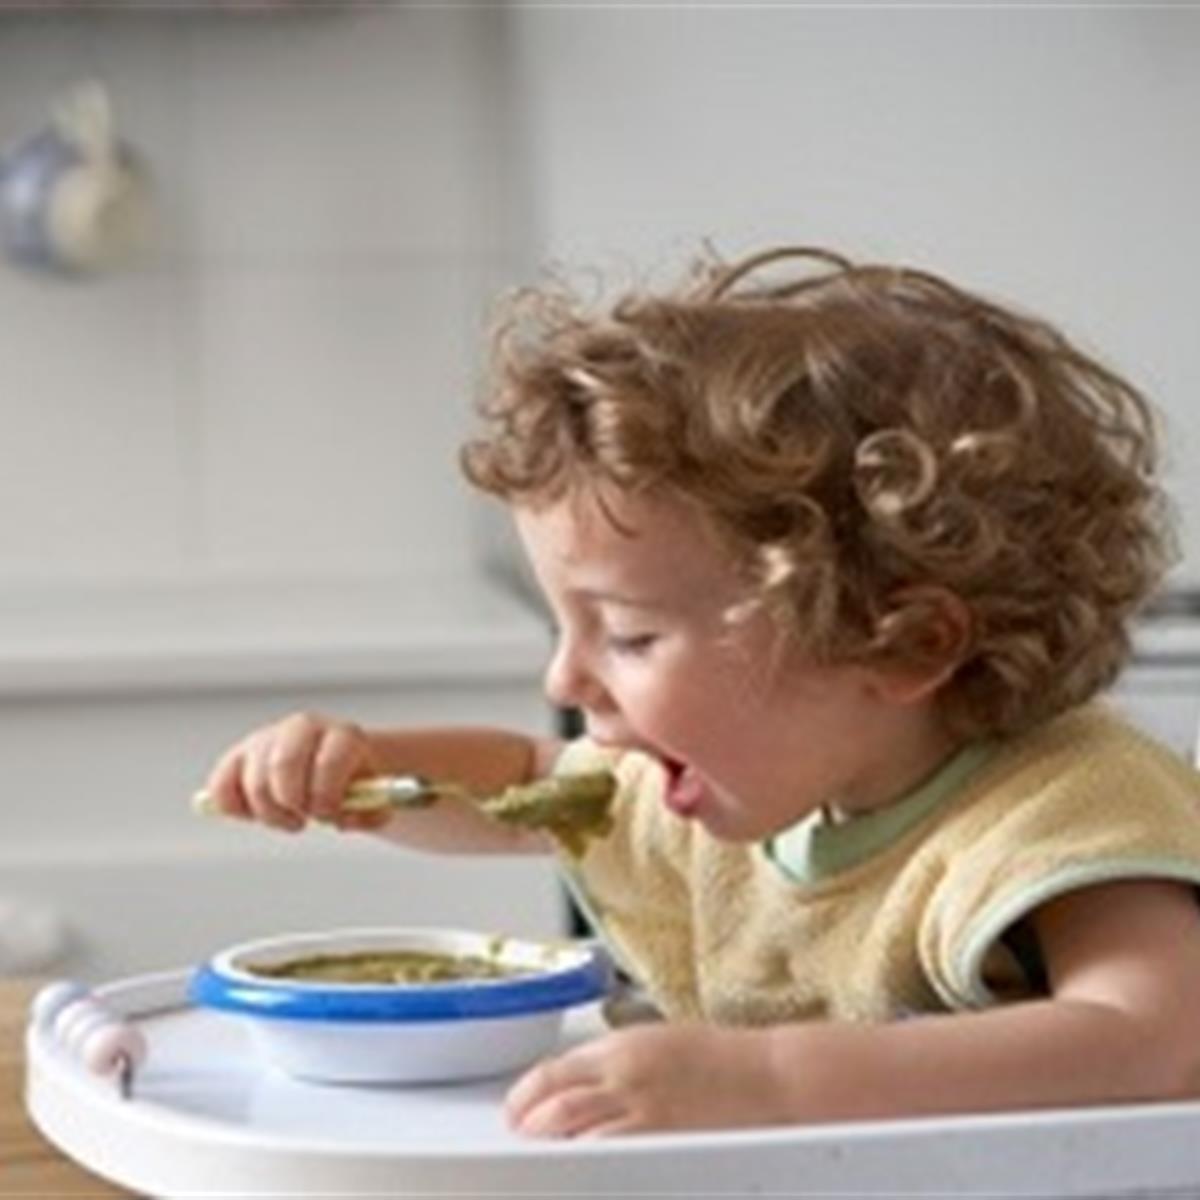 Baby Food Options To Introduce to Your Child